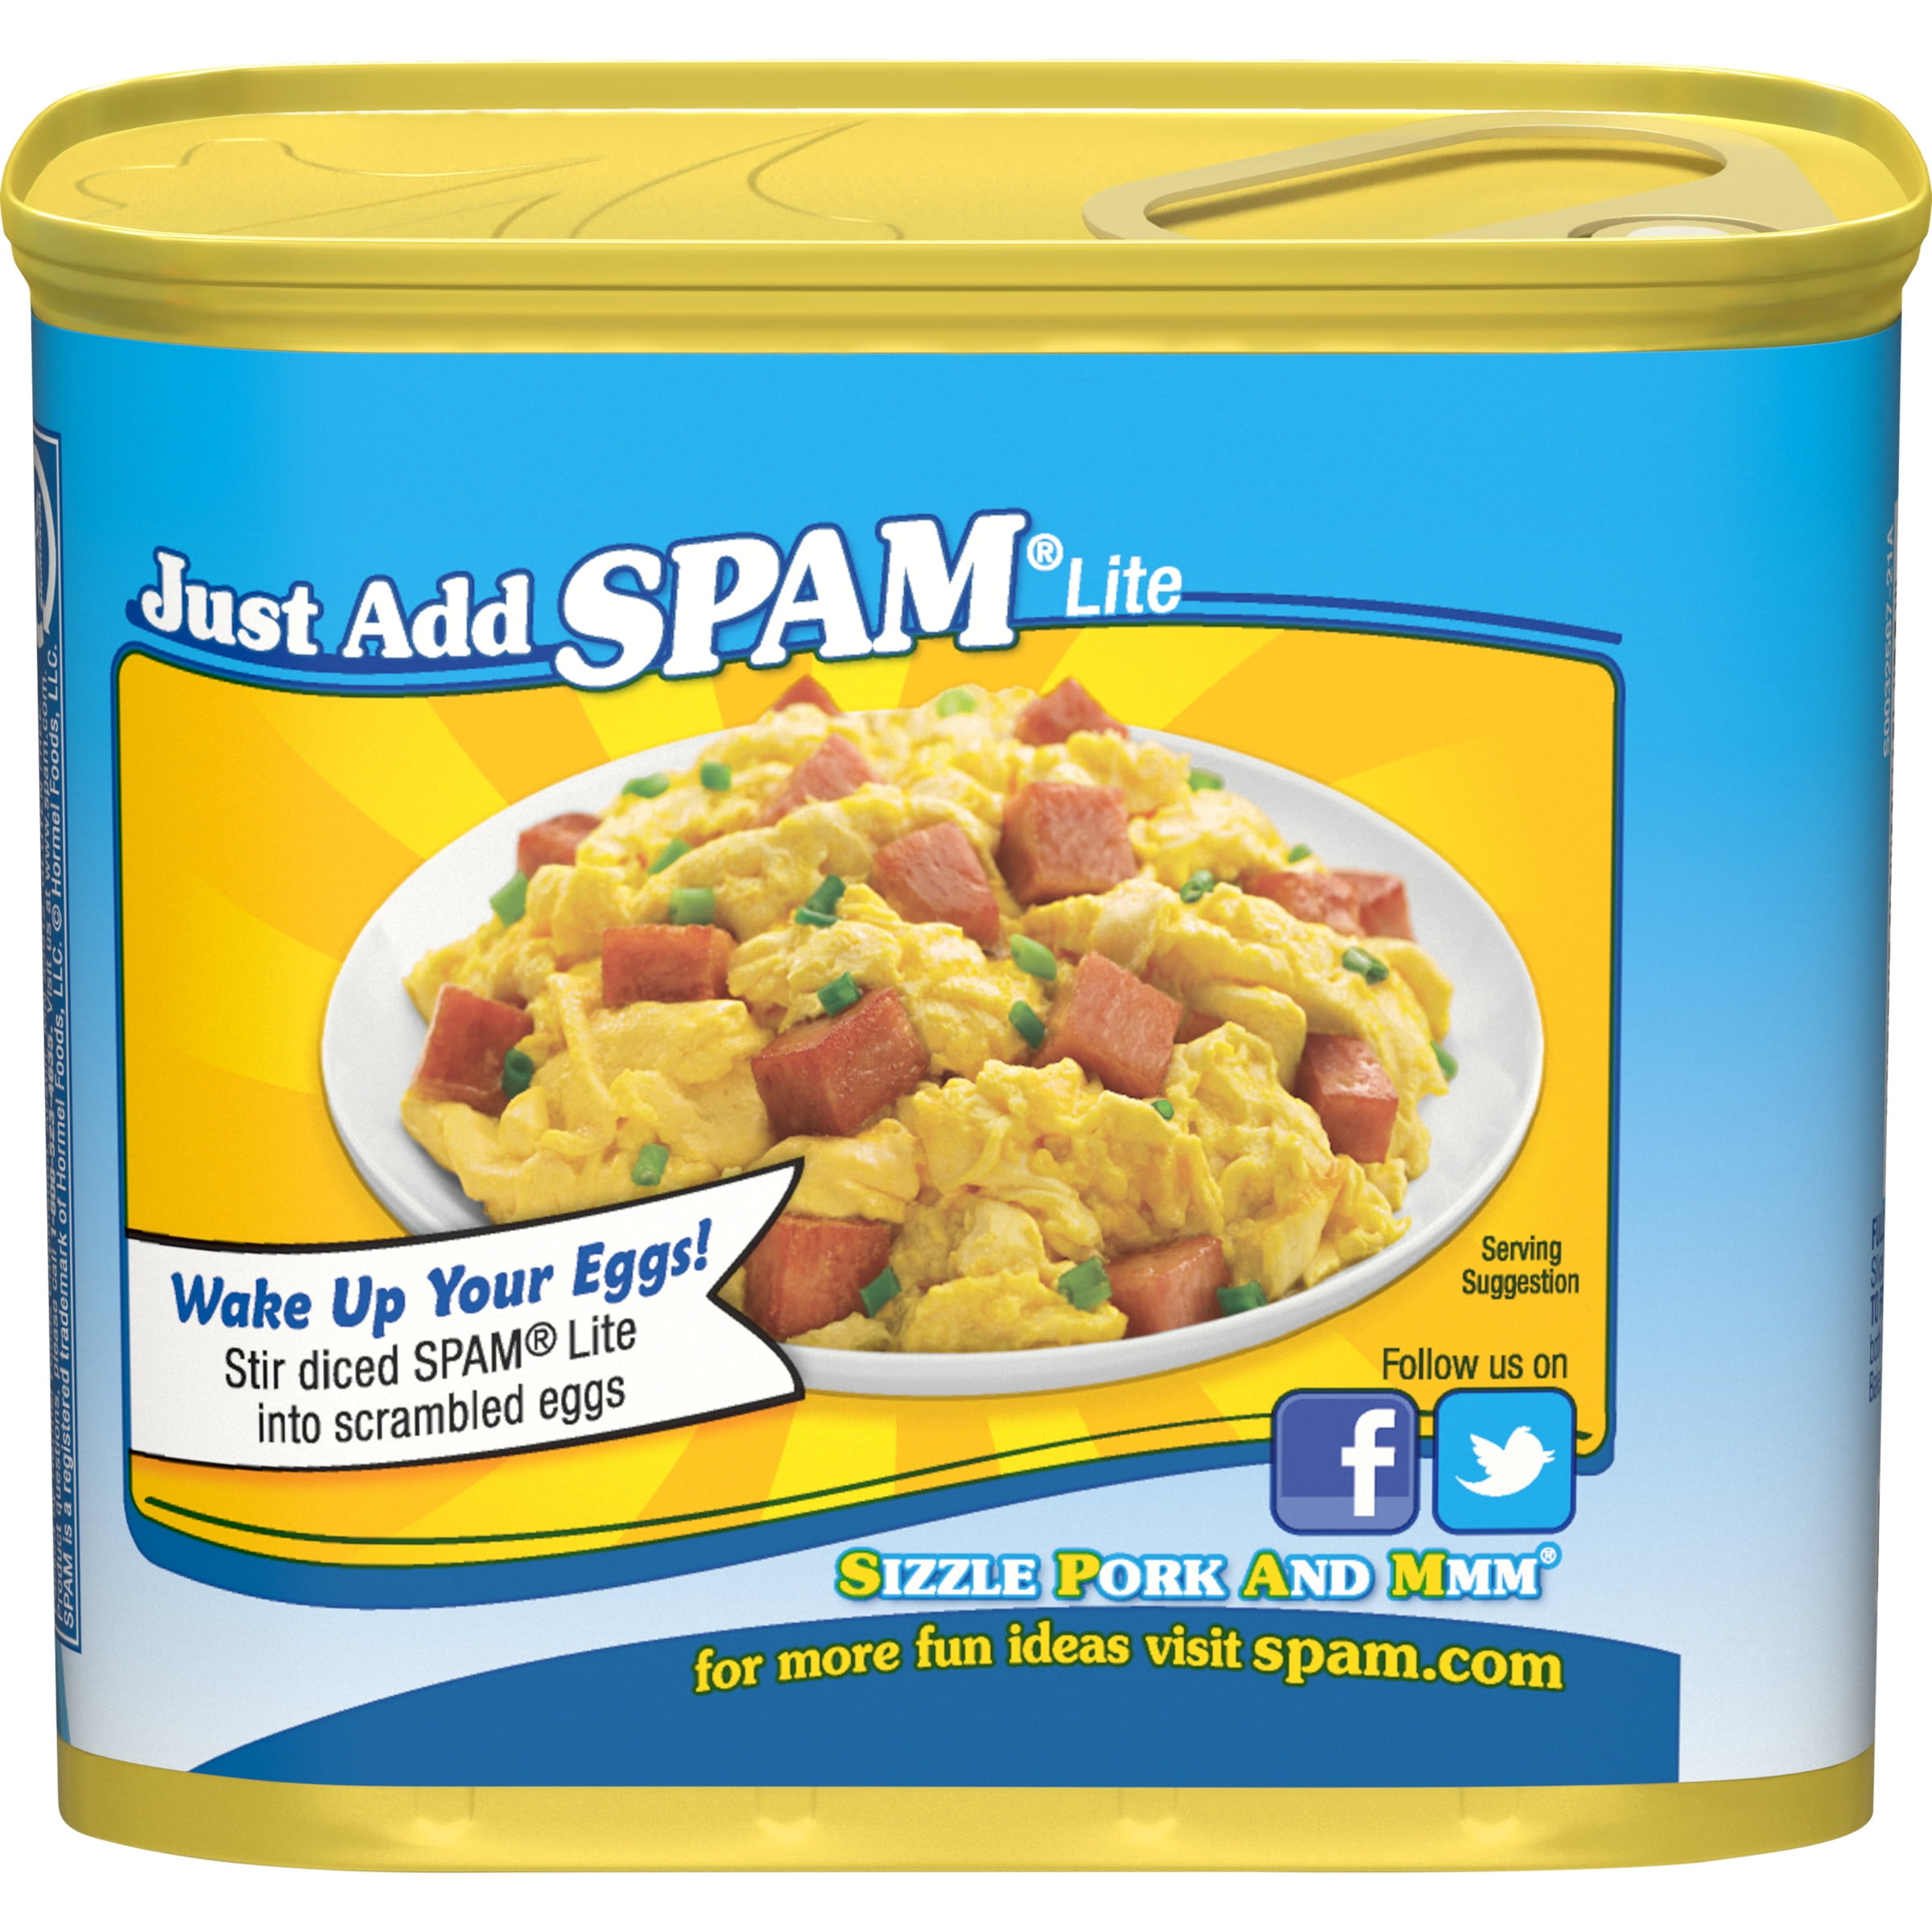 Spam meat is back: COVID adds to quest for portable, cheap food